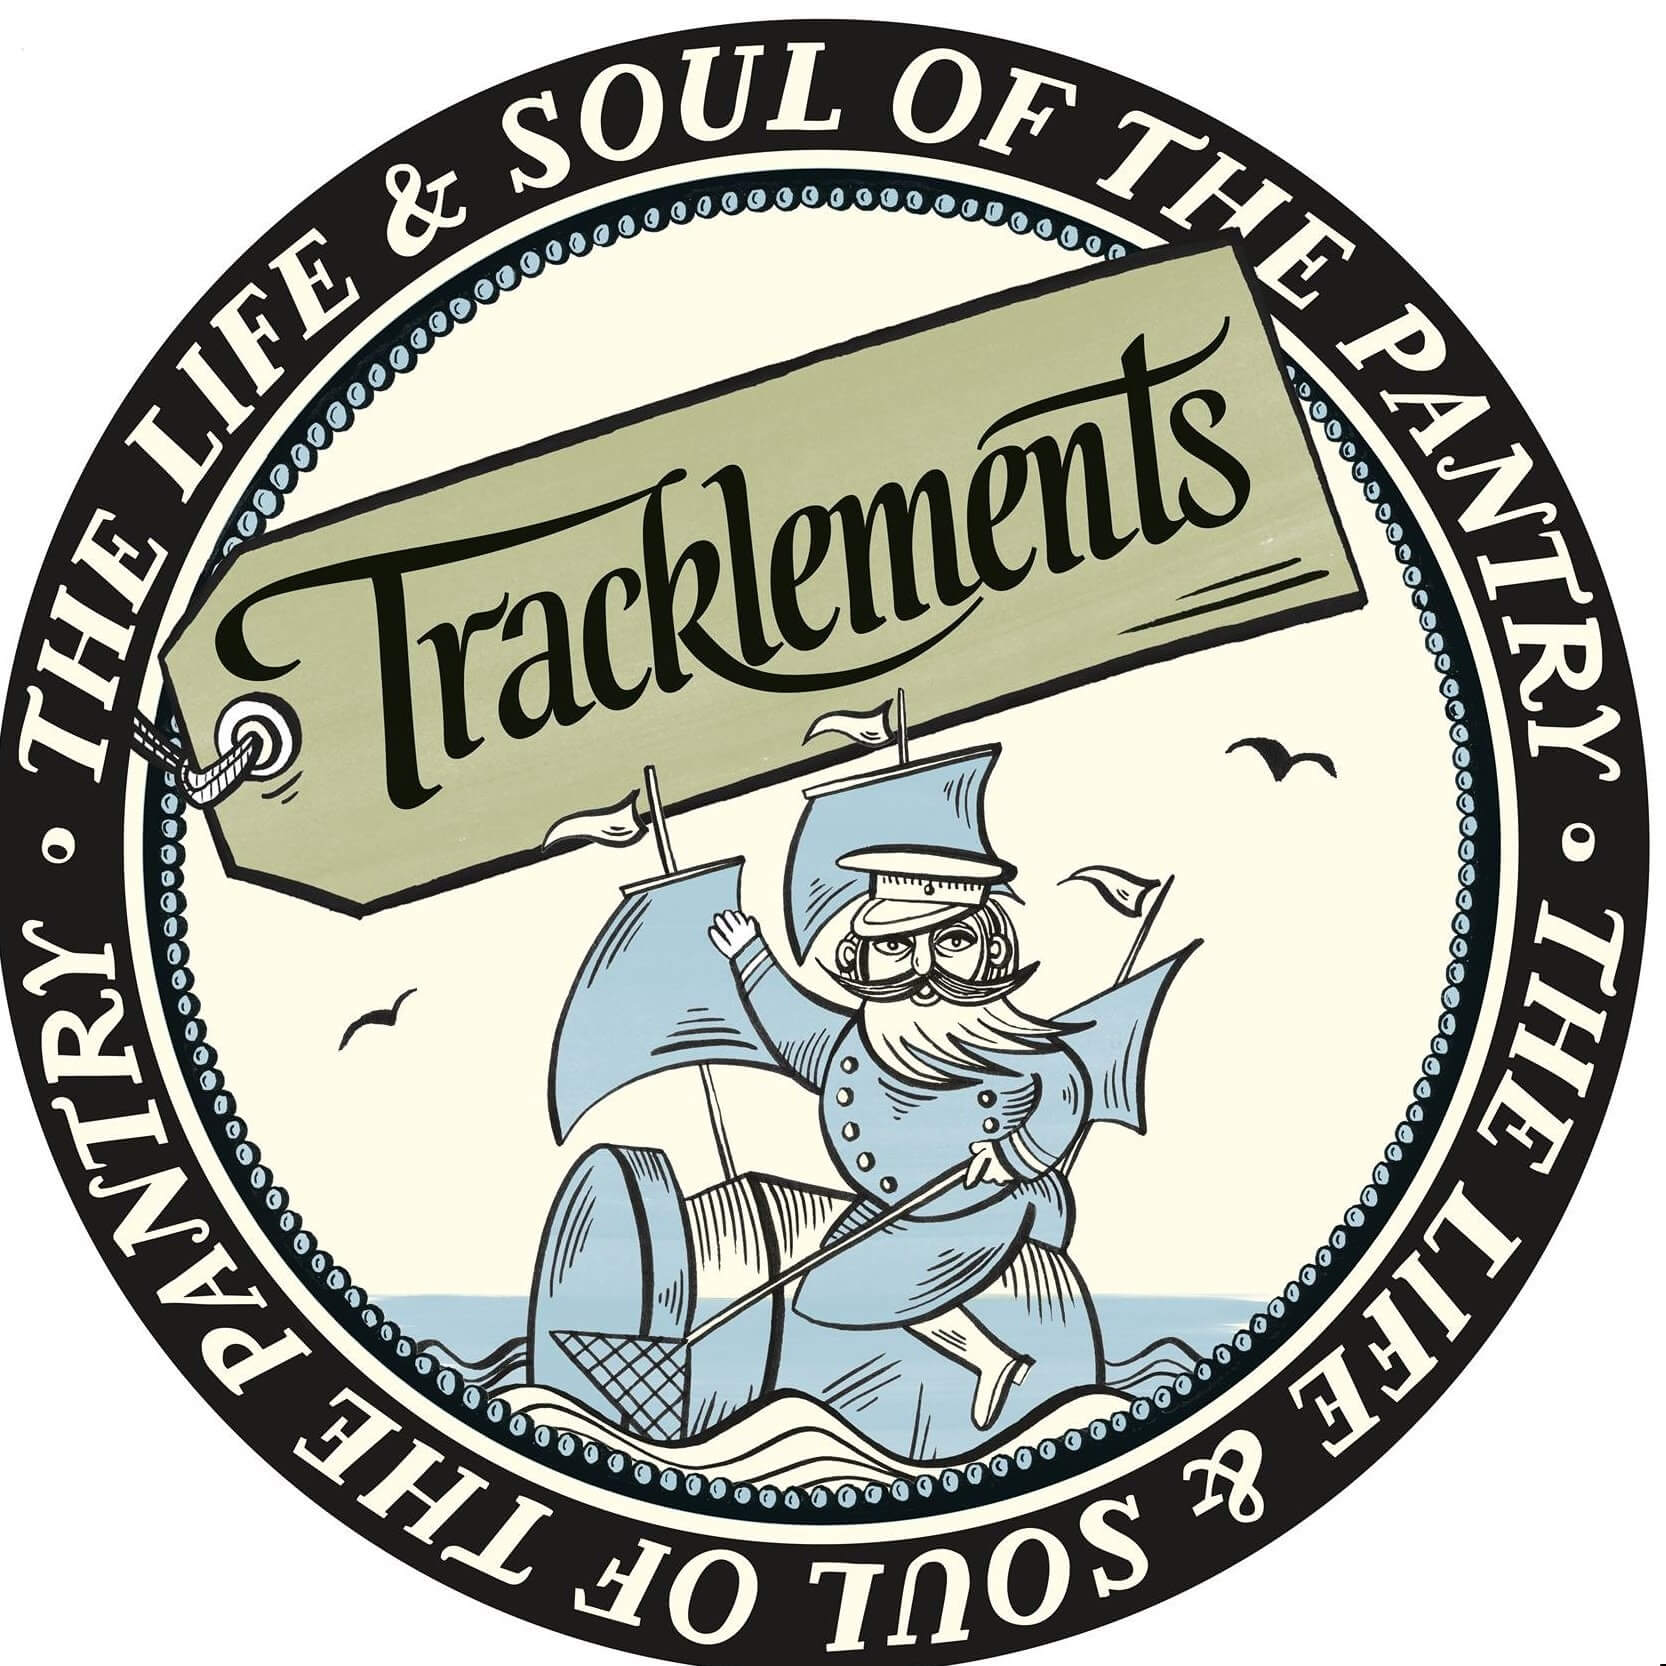 Tracklements brand logo